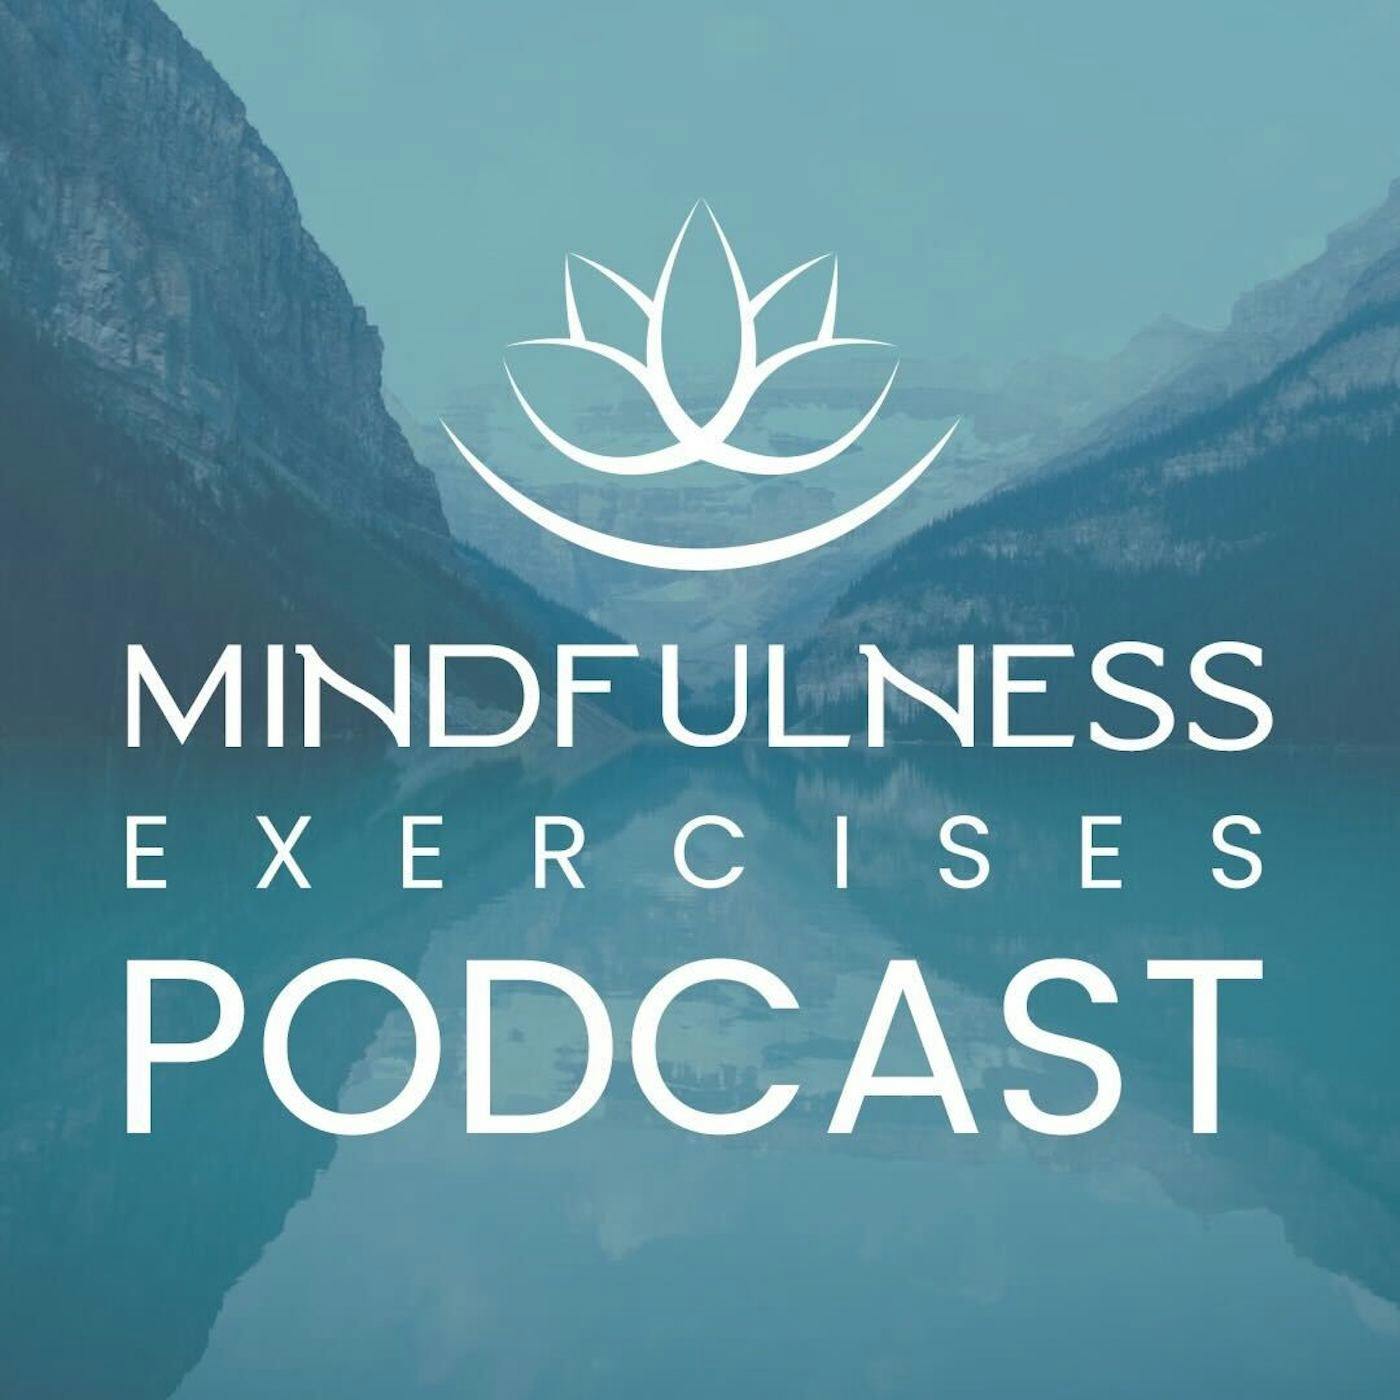 Connecting Self-Compassion and Mindfulness, with Chris Germer